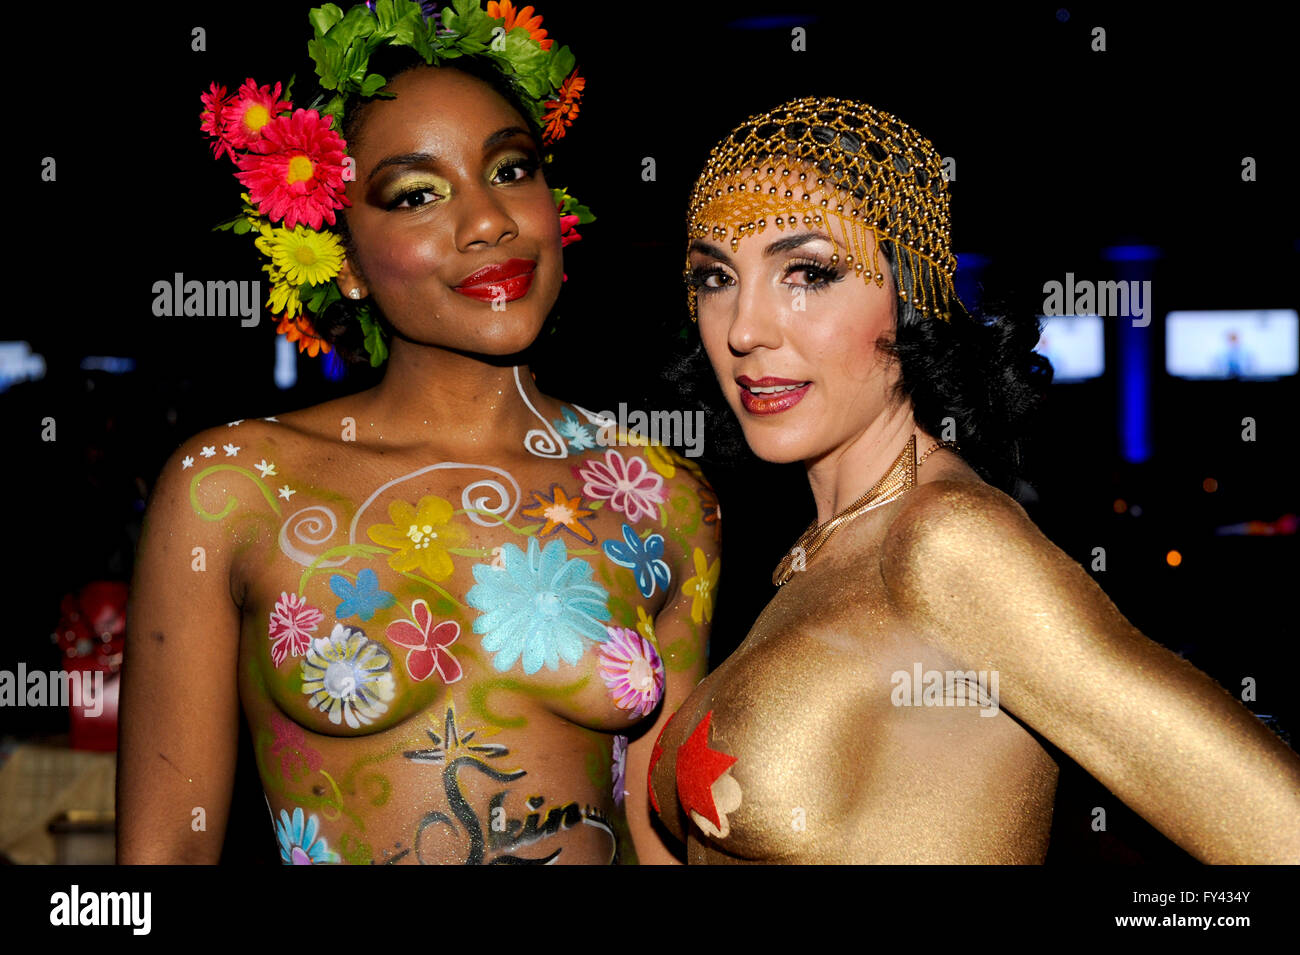 Las Vegas, Nevada, USA. 20th Apr, 2016. Robin Slonina and The Sapphire Gentleman's Club Showroom & Lounge in downtown Las Vegas hosted the Skin Wars Season 3 Premiere Party on Wednesday April 20th, 2016 from 8 to 11pm Credit:  Ken Howard/Alamy Live News Stock Photo